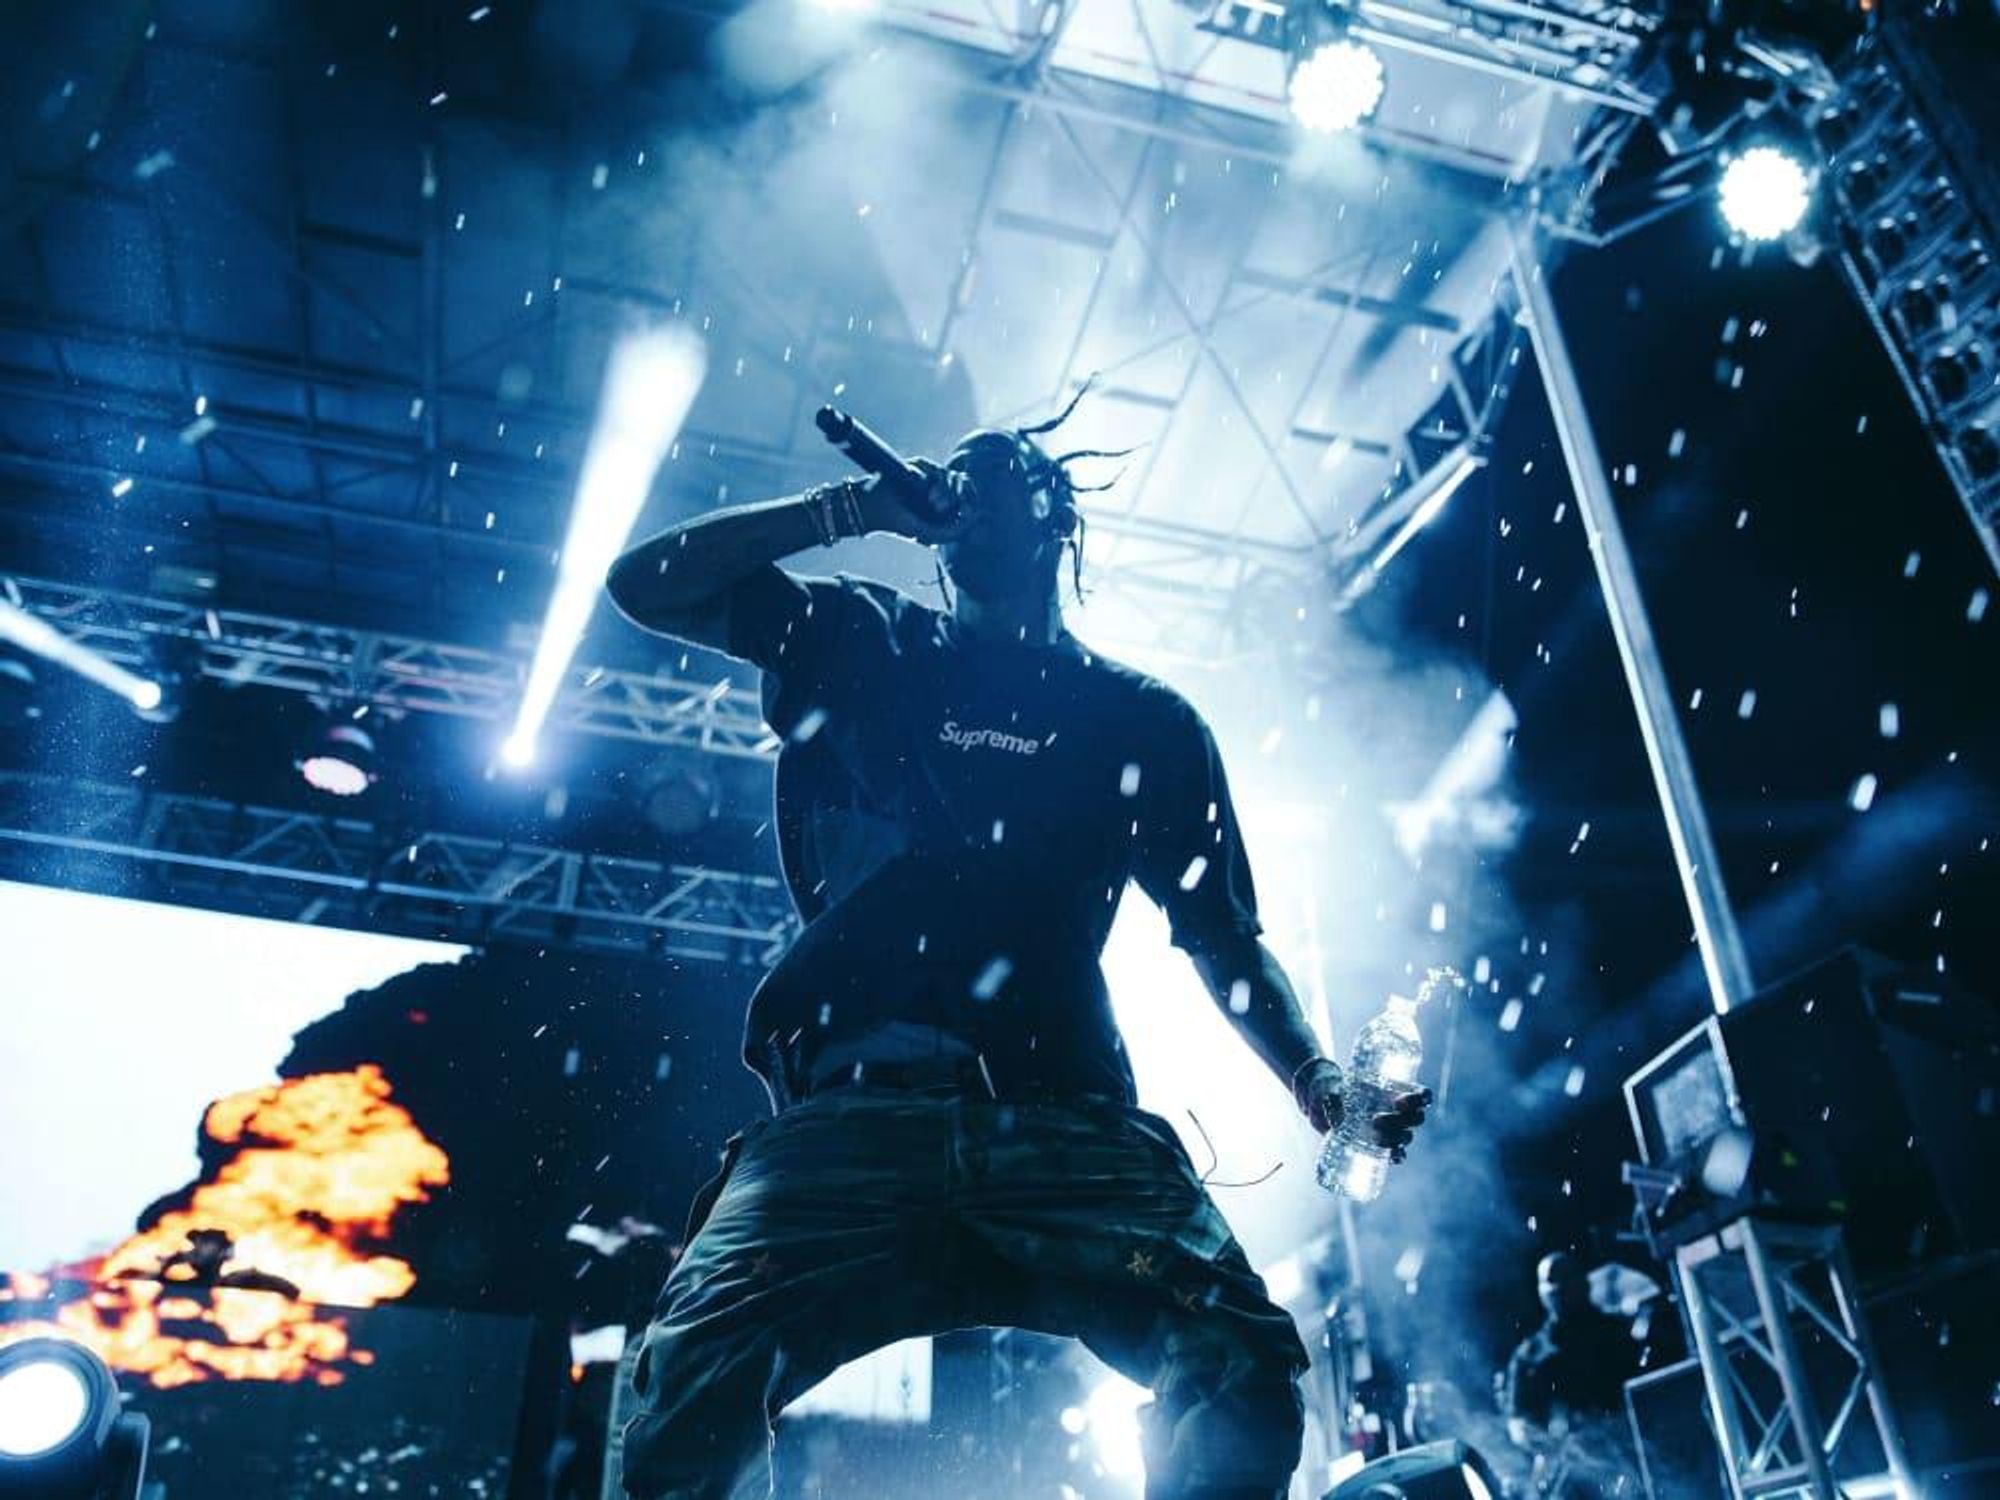 Travis Scott Proves His Festival's Staying Power at the Second